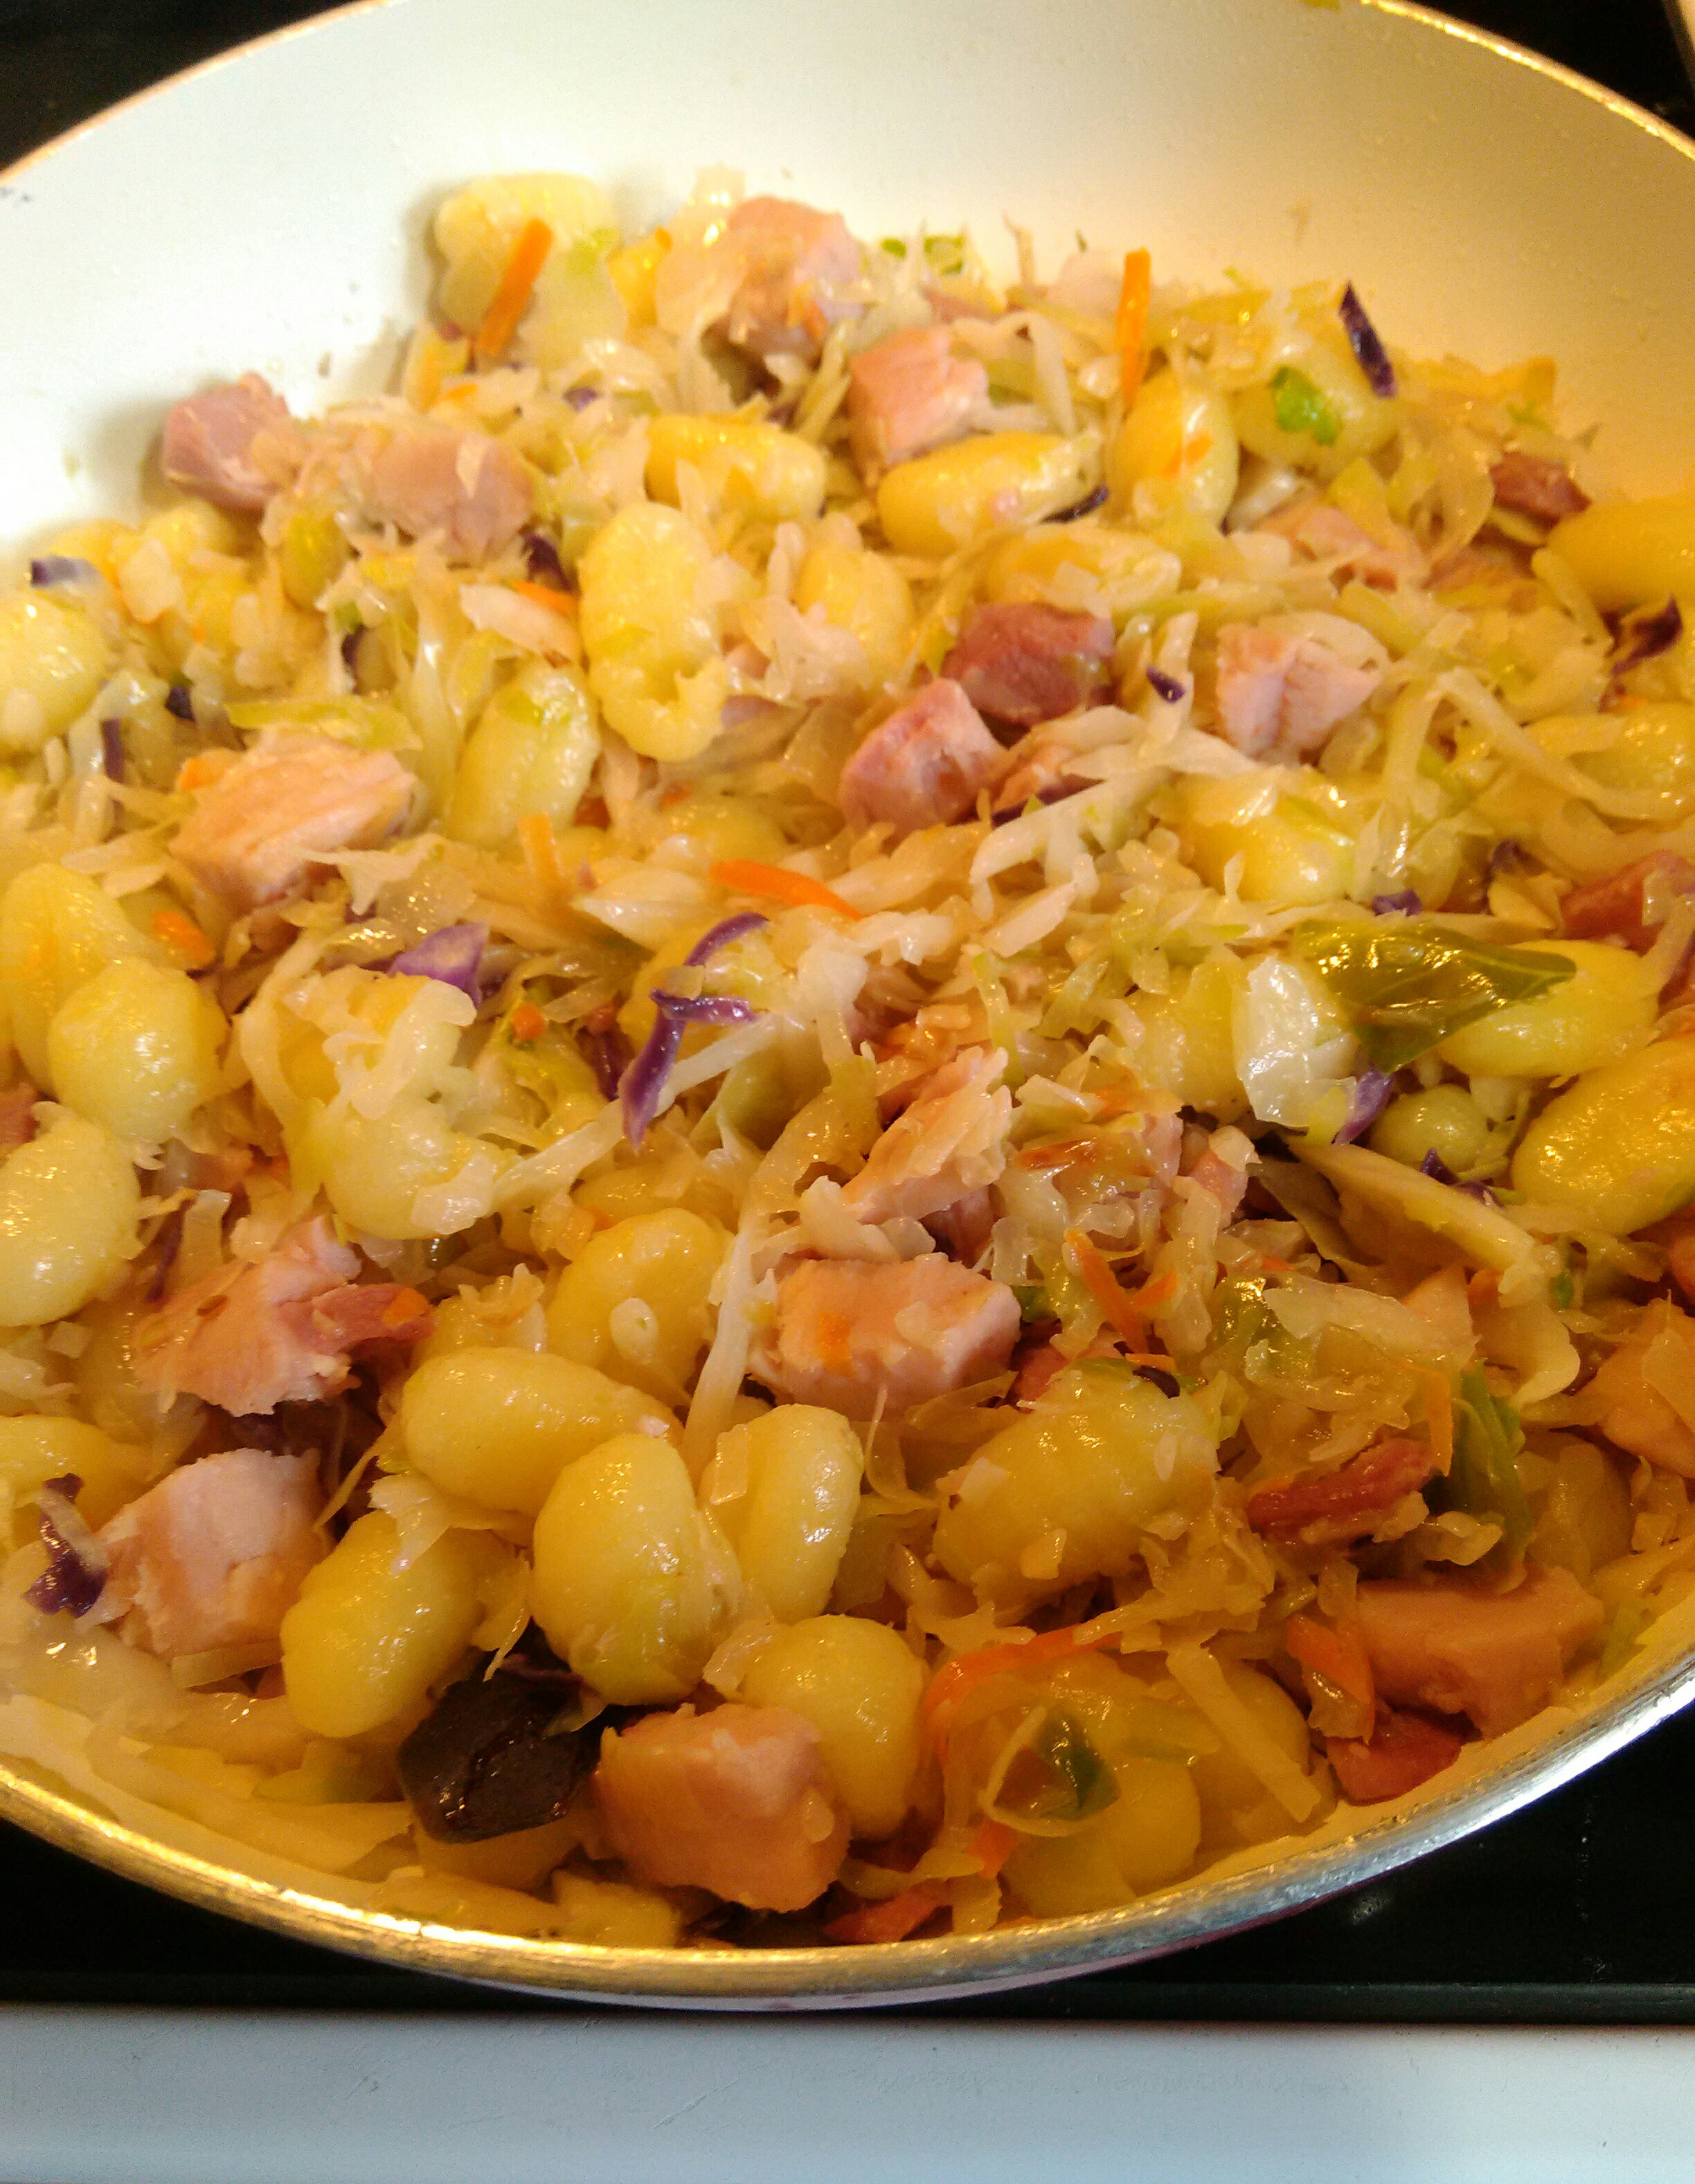 <p>A great way to use up leftover ham. Potato gnocchi and cubed ham are tossed with cooked cabbage and onions in this super-simple skillet meal. Stephanie gives it 5 stars: "Easy and very tasty! I used prepackaged shredded coleslaw."</p>
                          